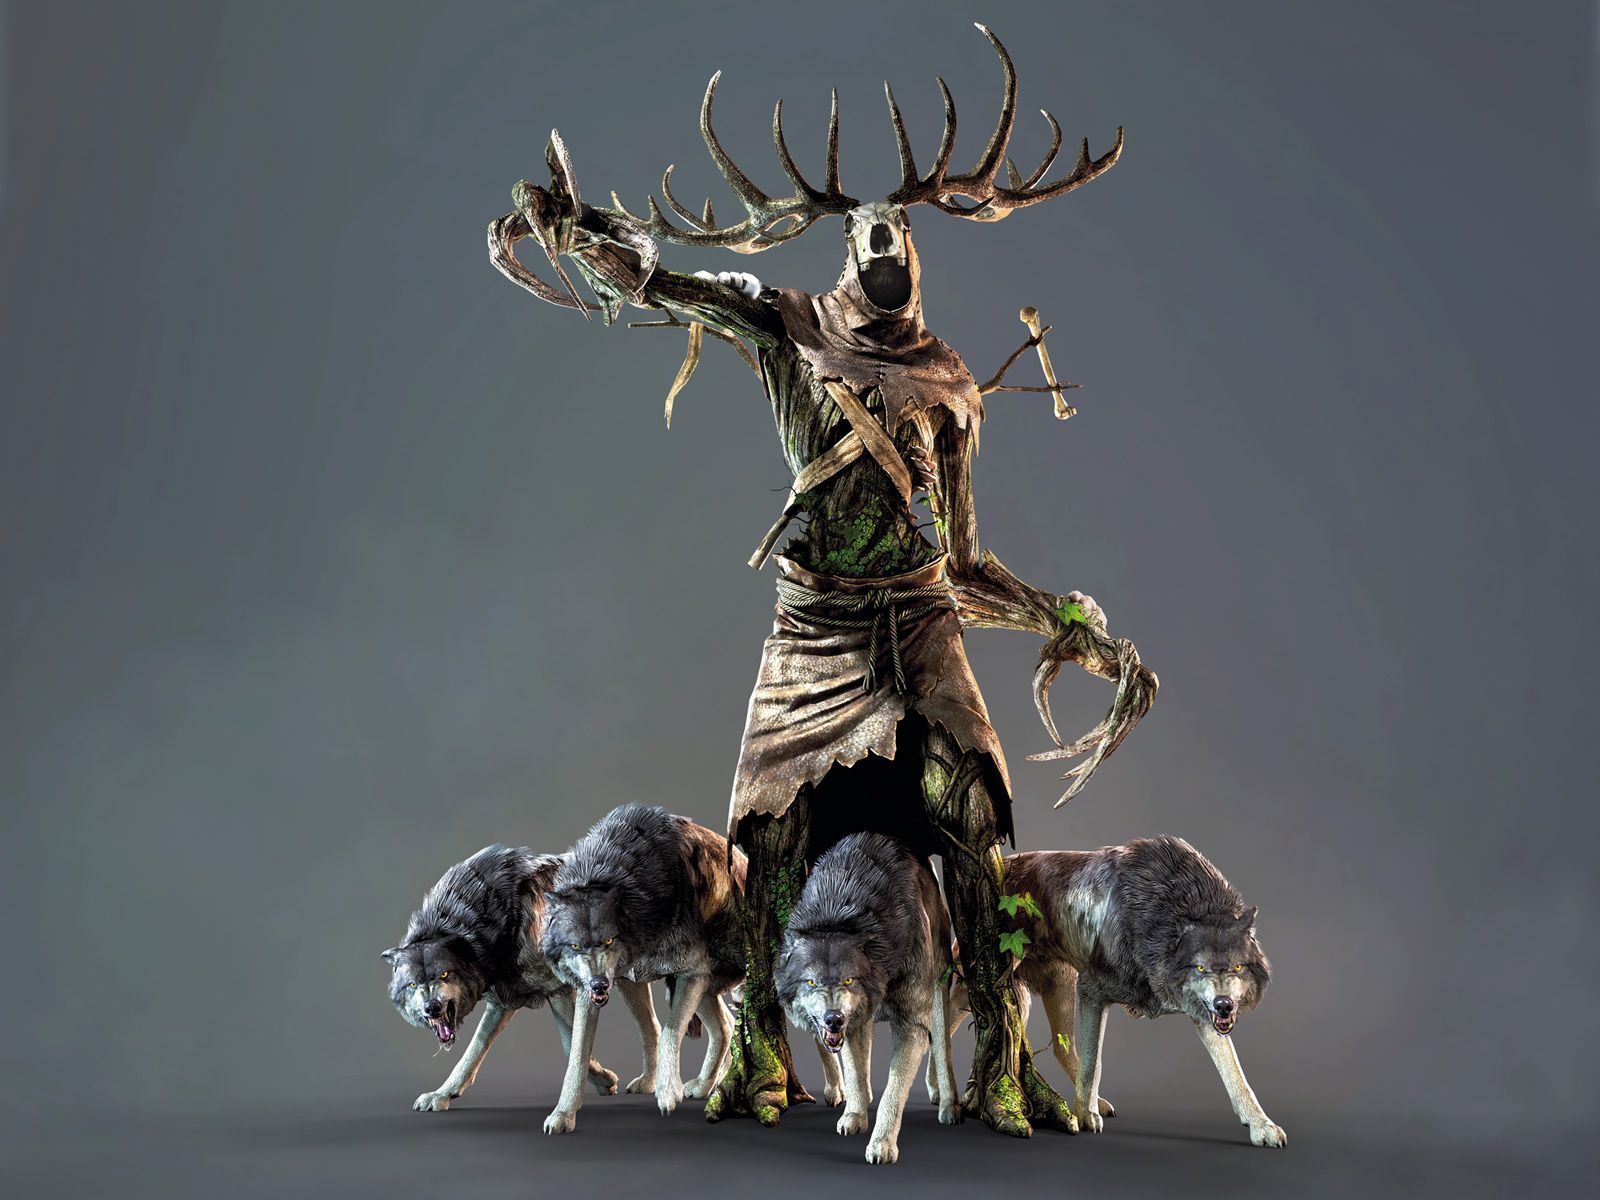 The Leshen monster from The Witcher 3 reminds me of the Wendigo